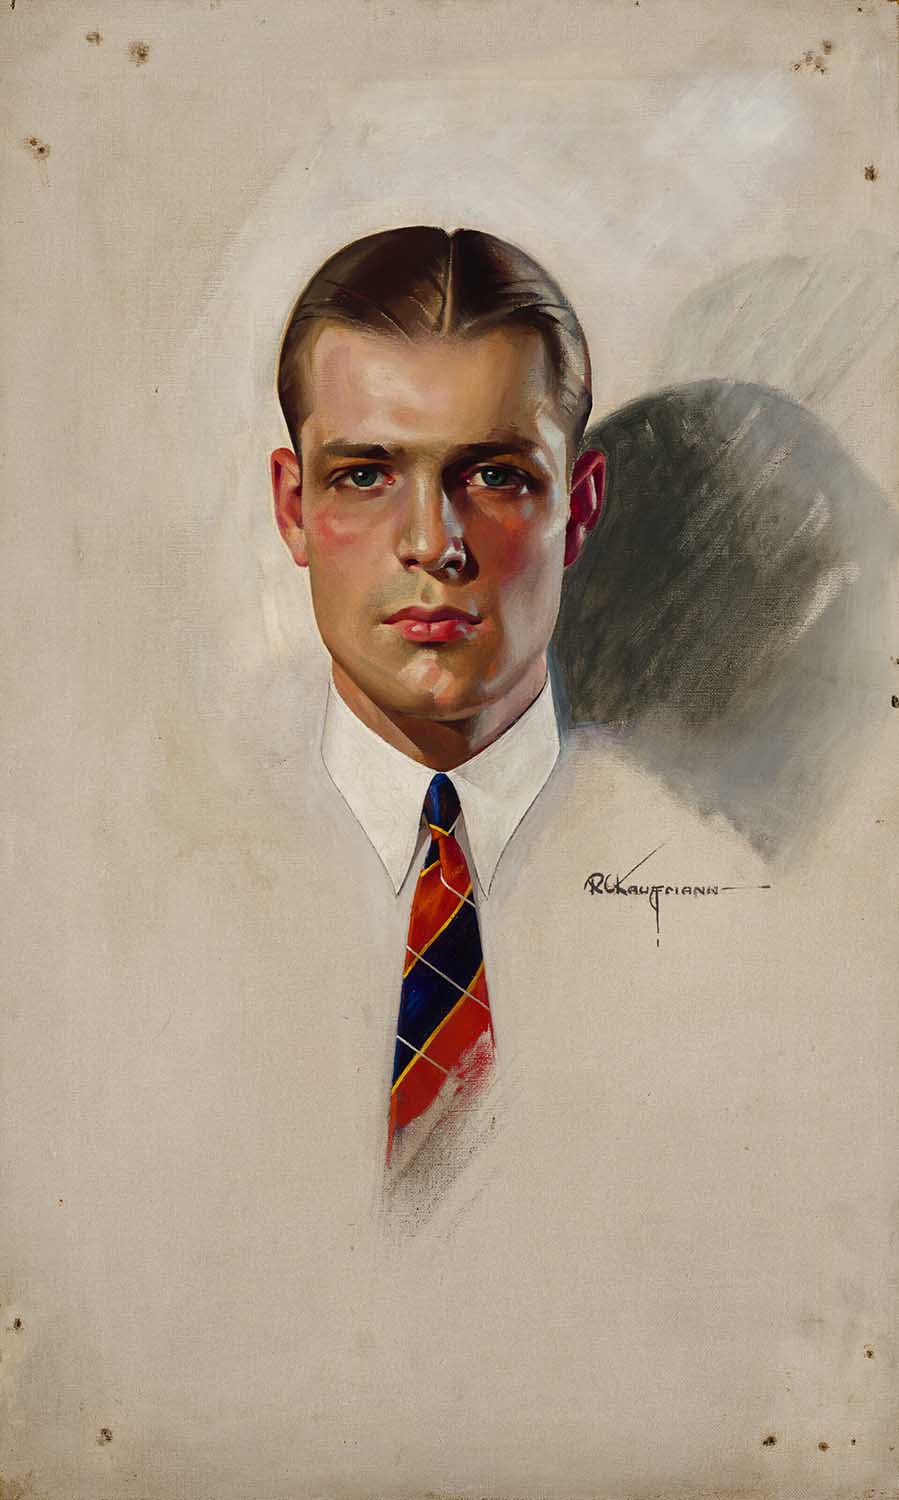 man wearing a white collared shirt and red and blue striped tie